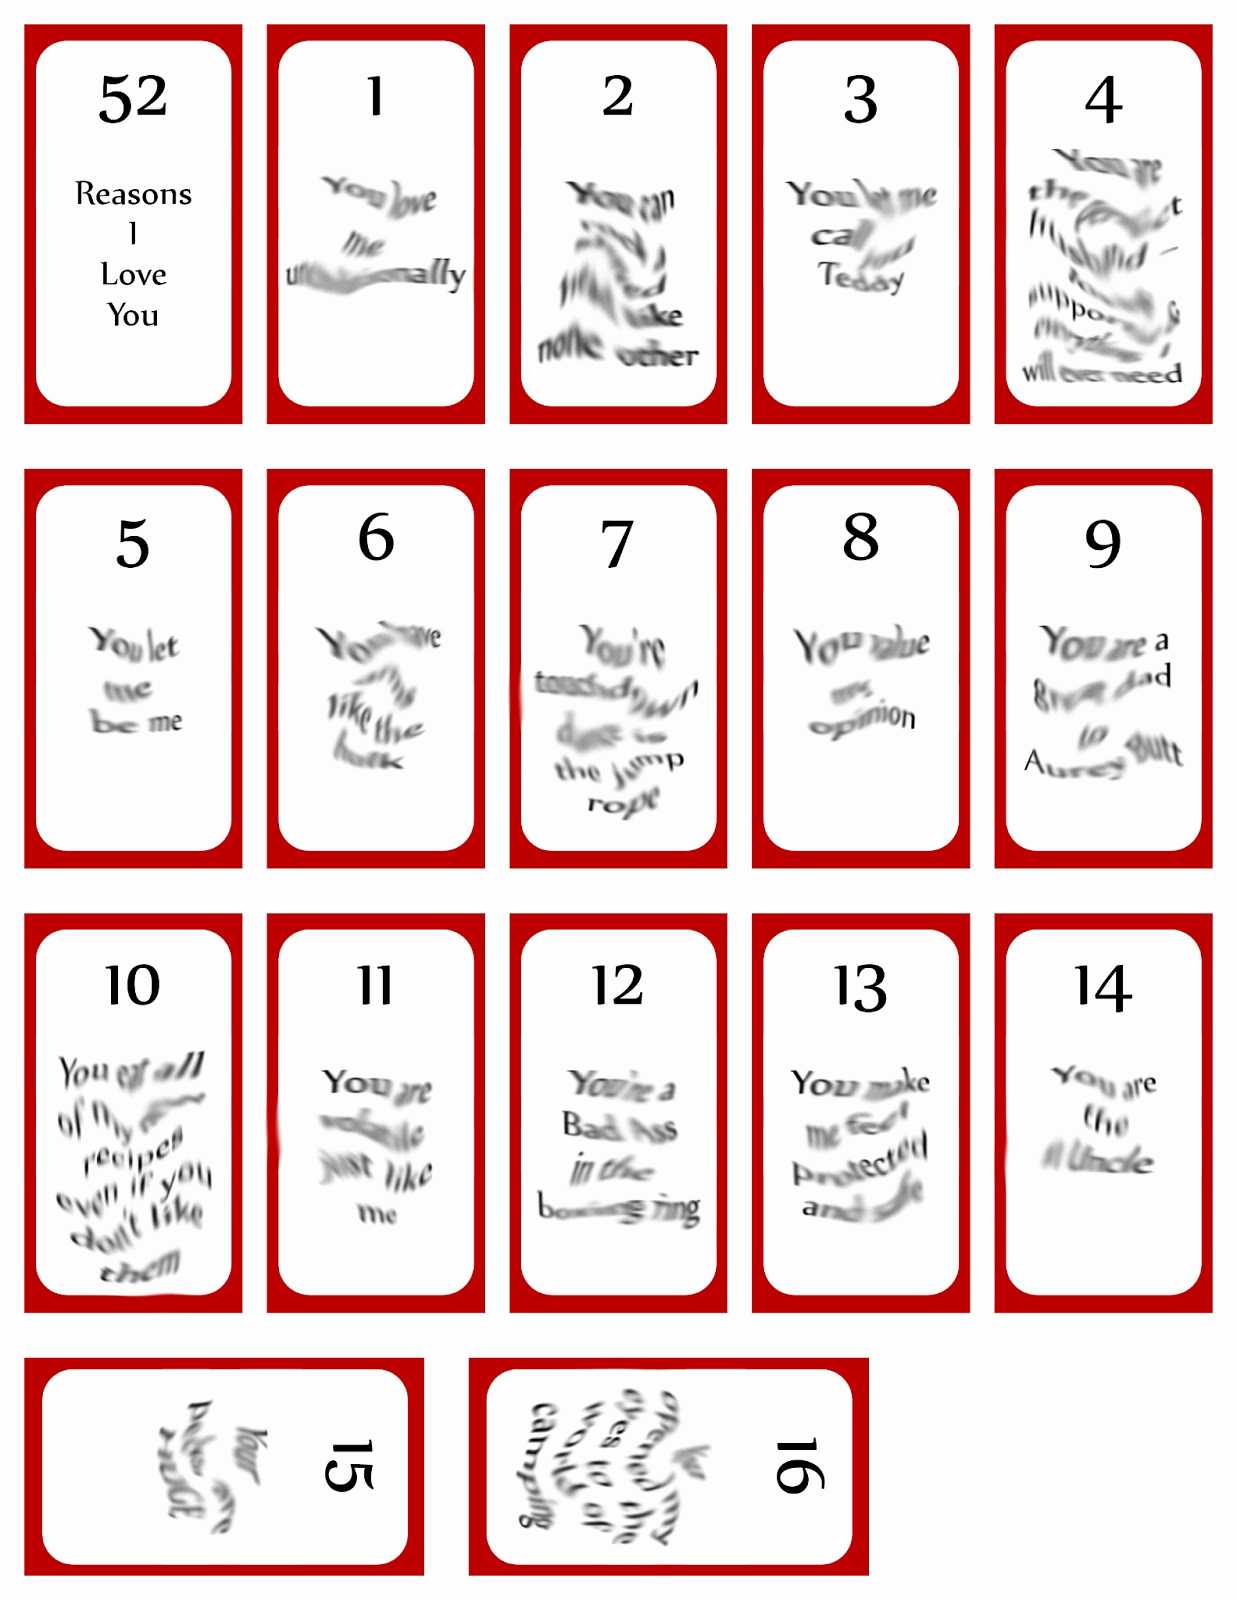 52 Reasons Why I Love You Cards Printable Templates Free With Regard To 52 Reasons Why I Love You Cards Templates Free